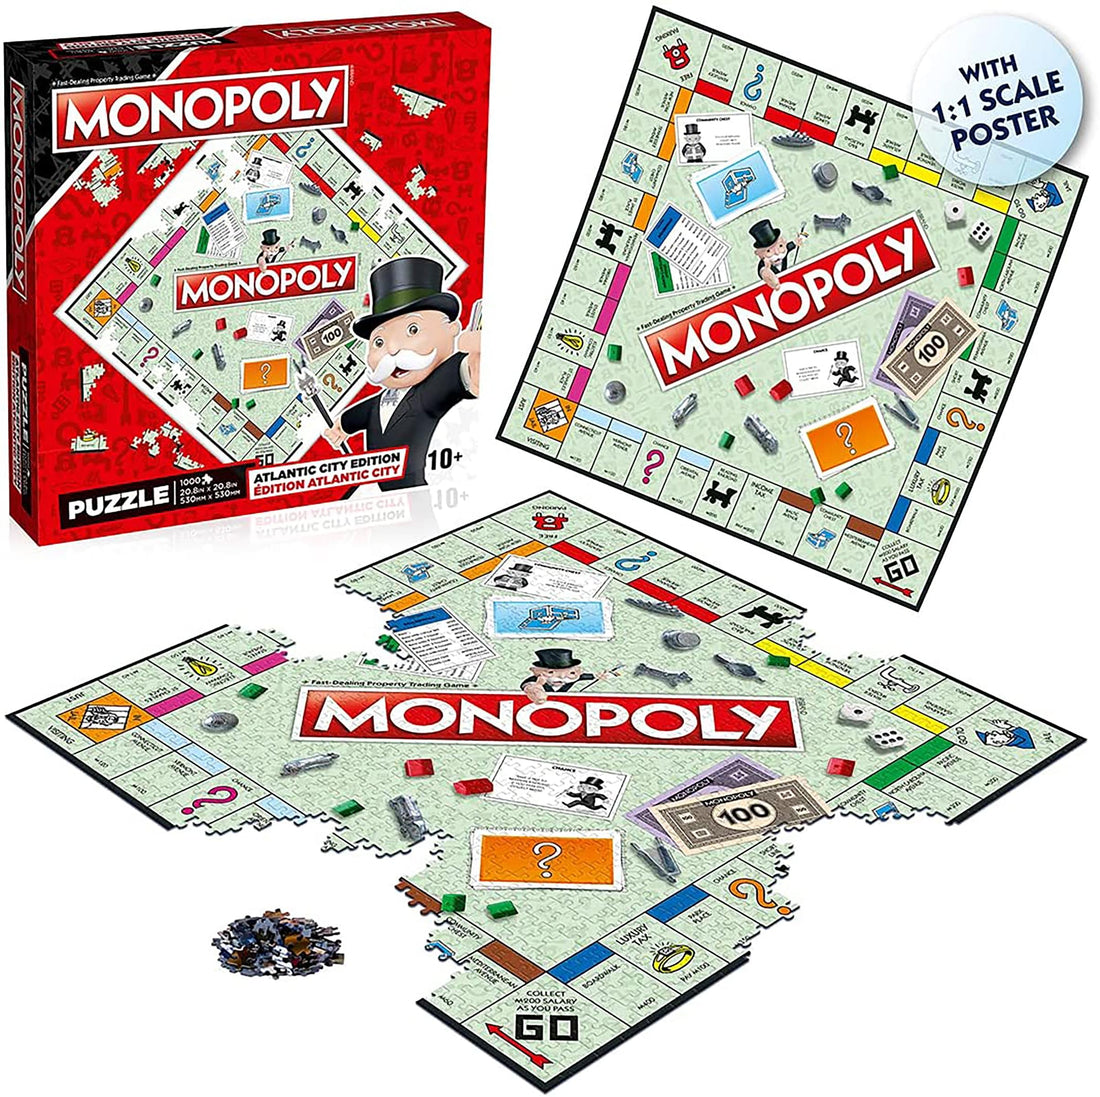 Monopoly Board Game 1000 Piece Jigsaw Puzzle | Free Shipping